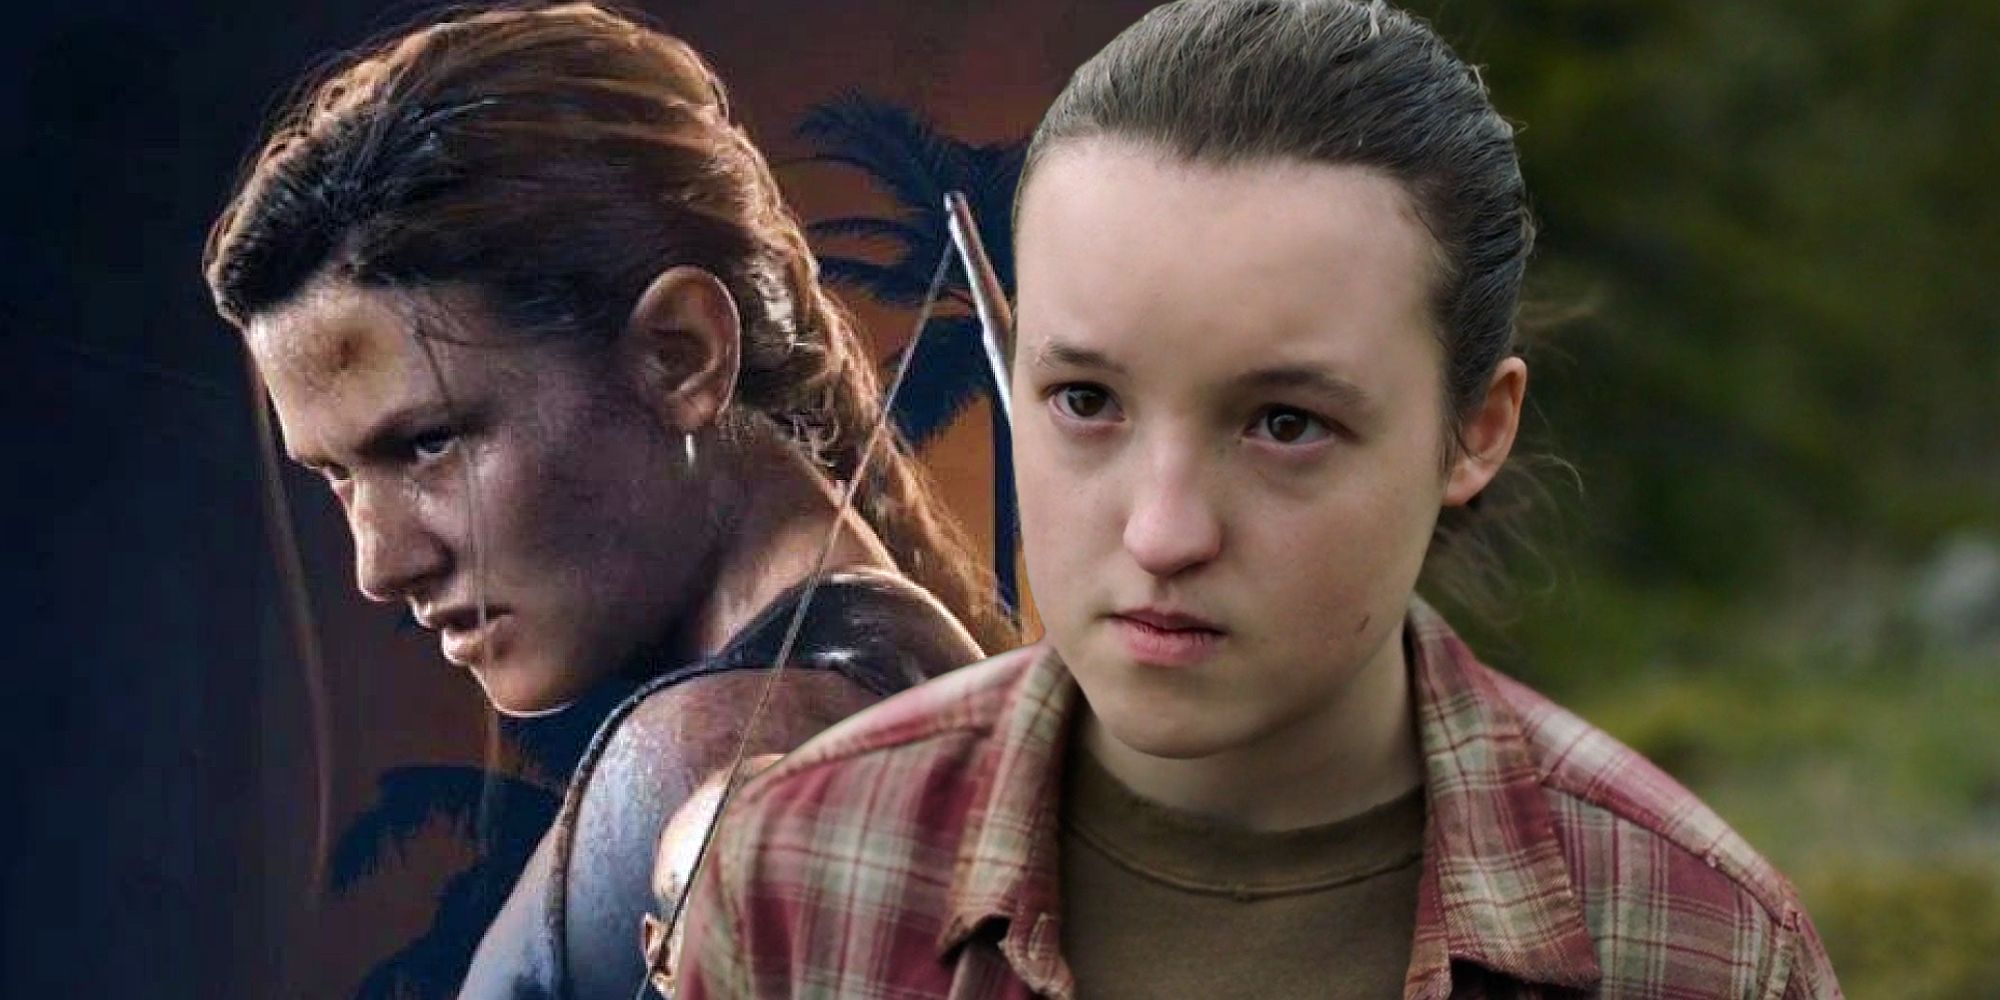 Abby scowling in The Last of Us Part II next to Bella Ramsey looking sad as Ellie in HBO's Last of Us